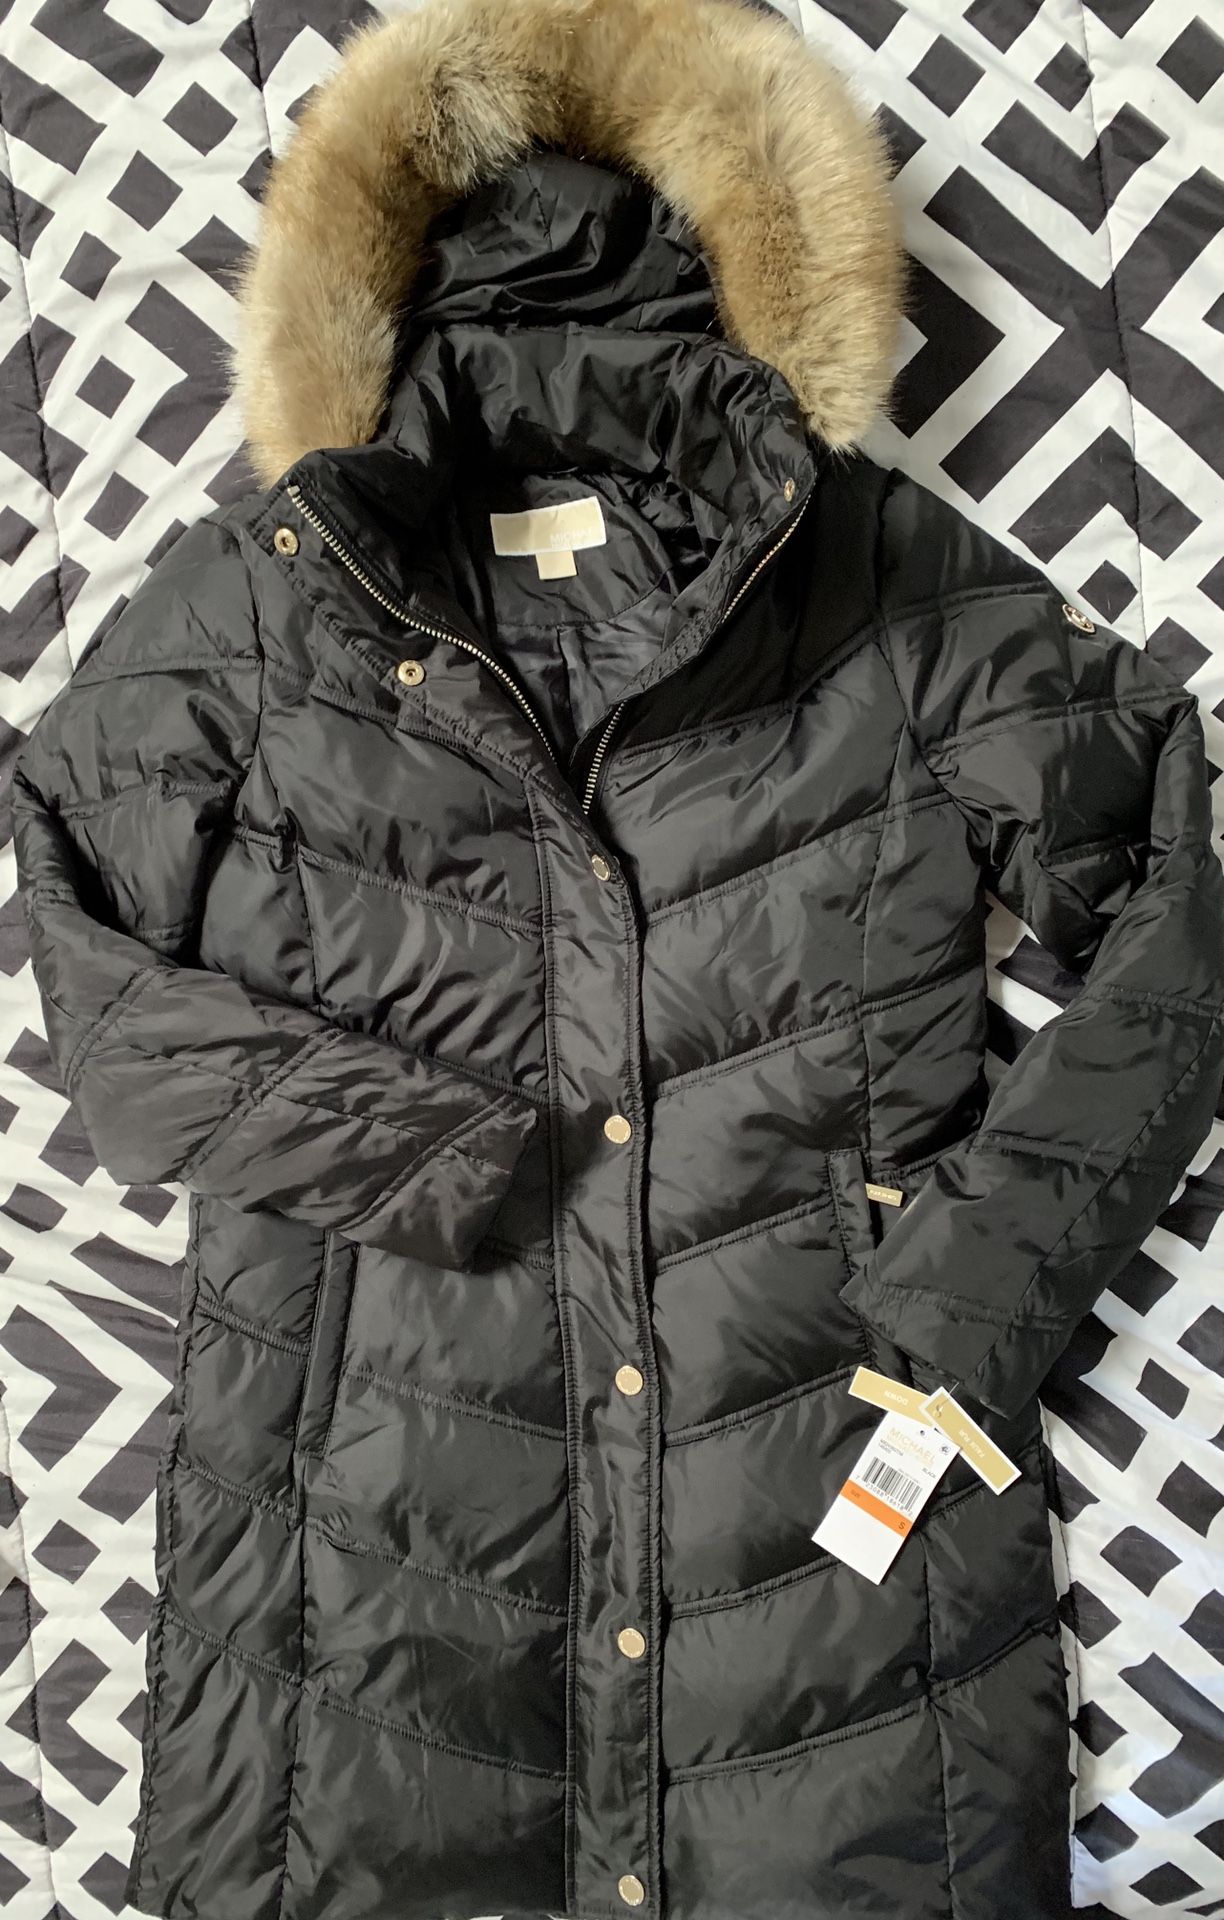 Michael kors jacket holiday special $60